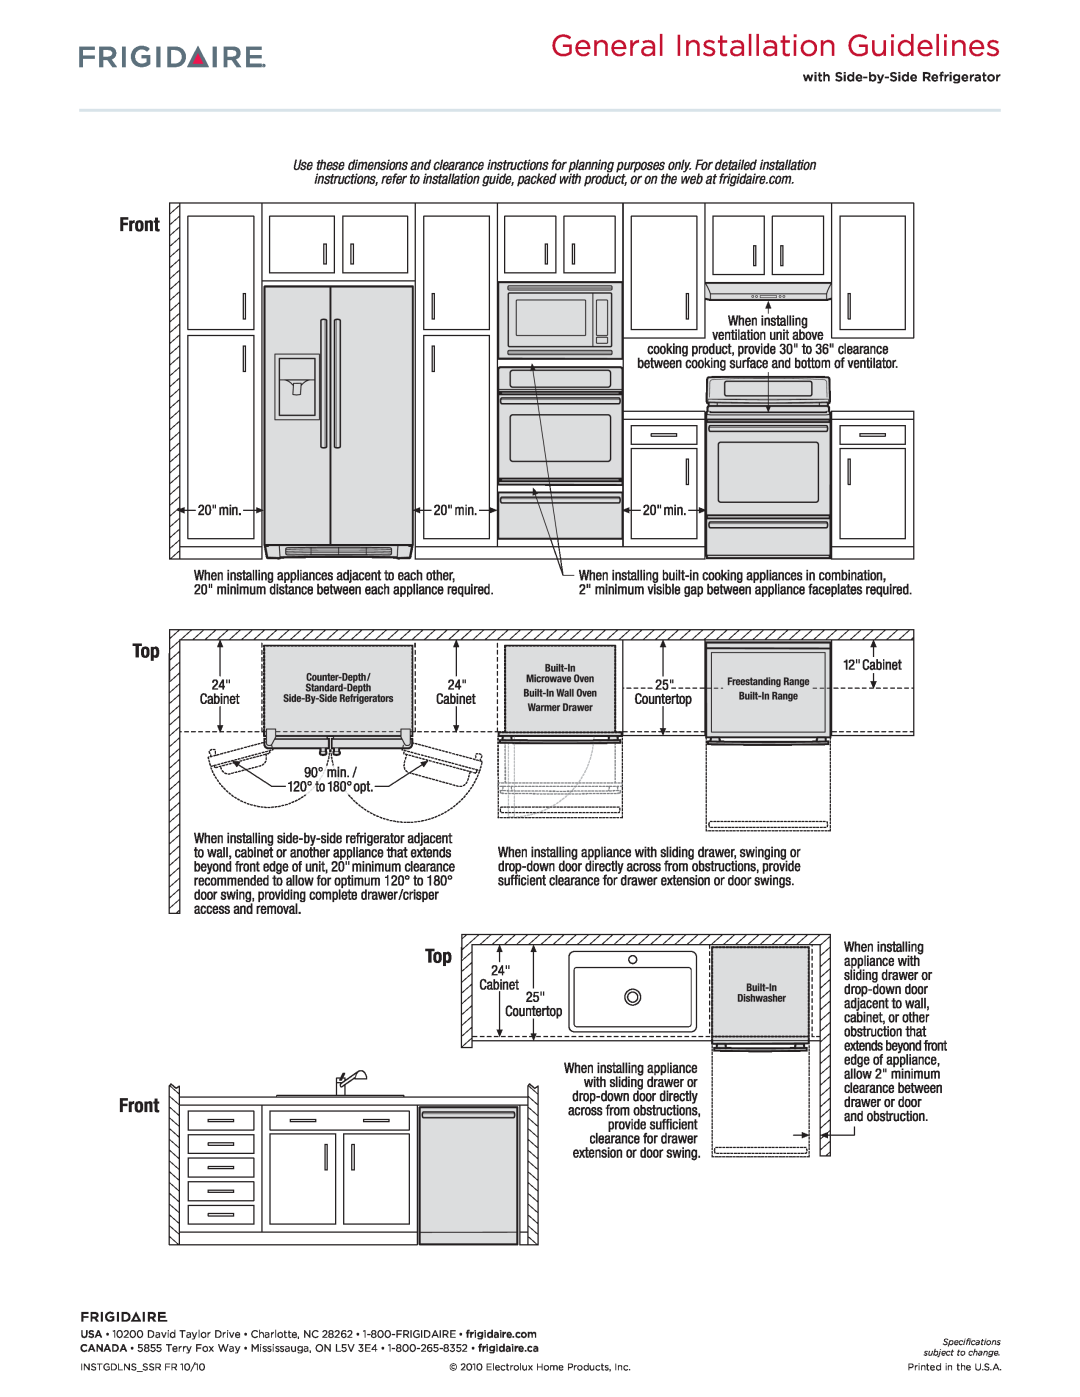 Frigidaire FPET2785KF dimensions General Installation Guidelines, Top Front 